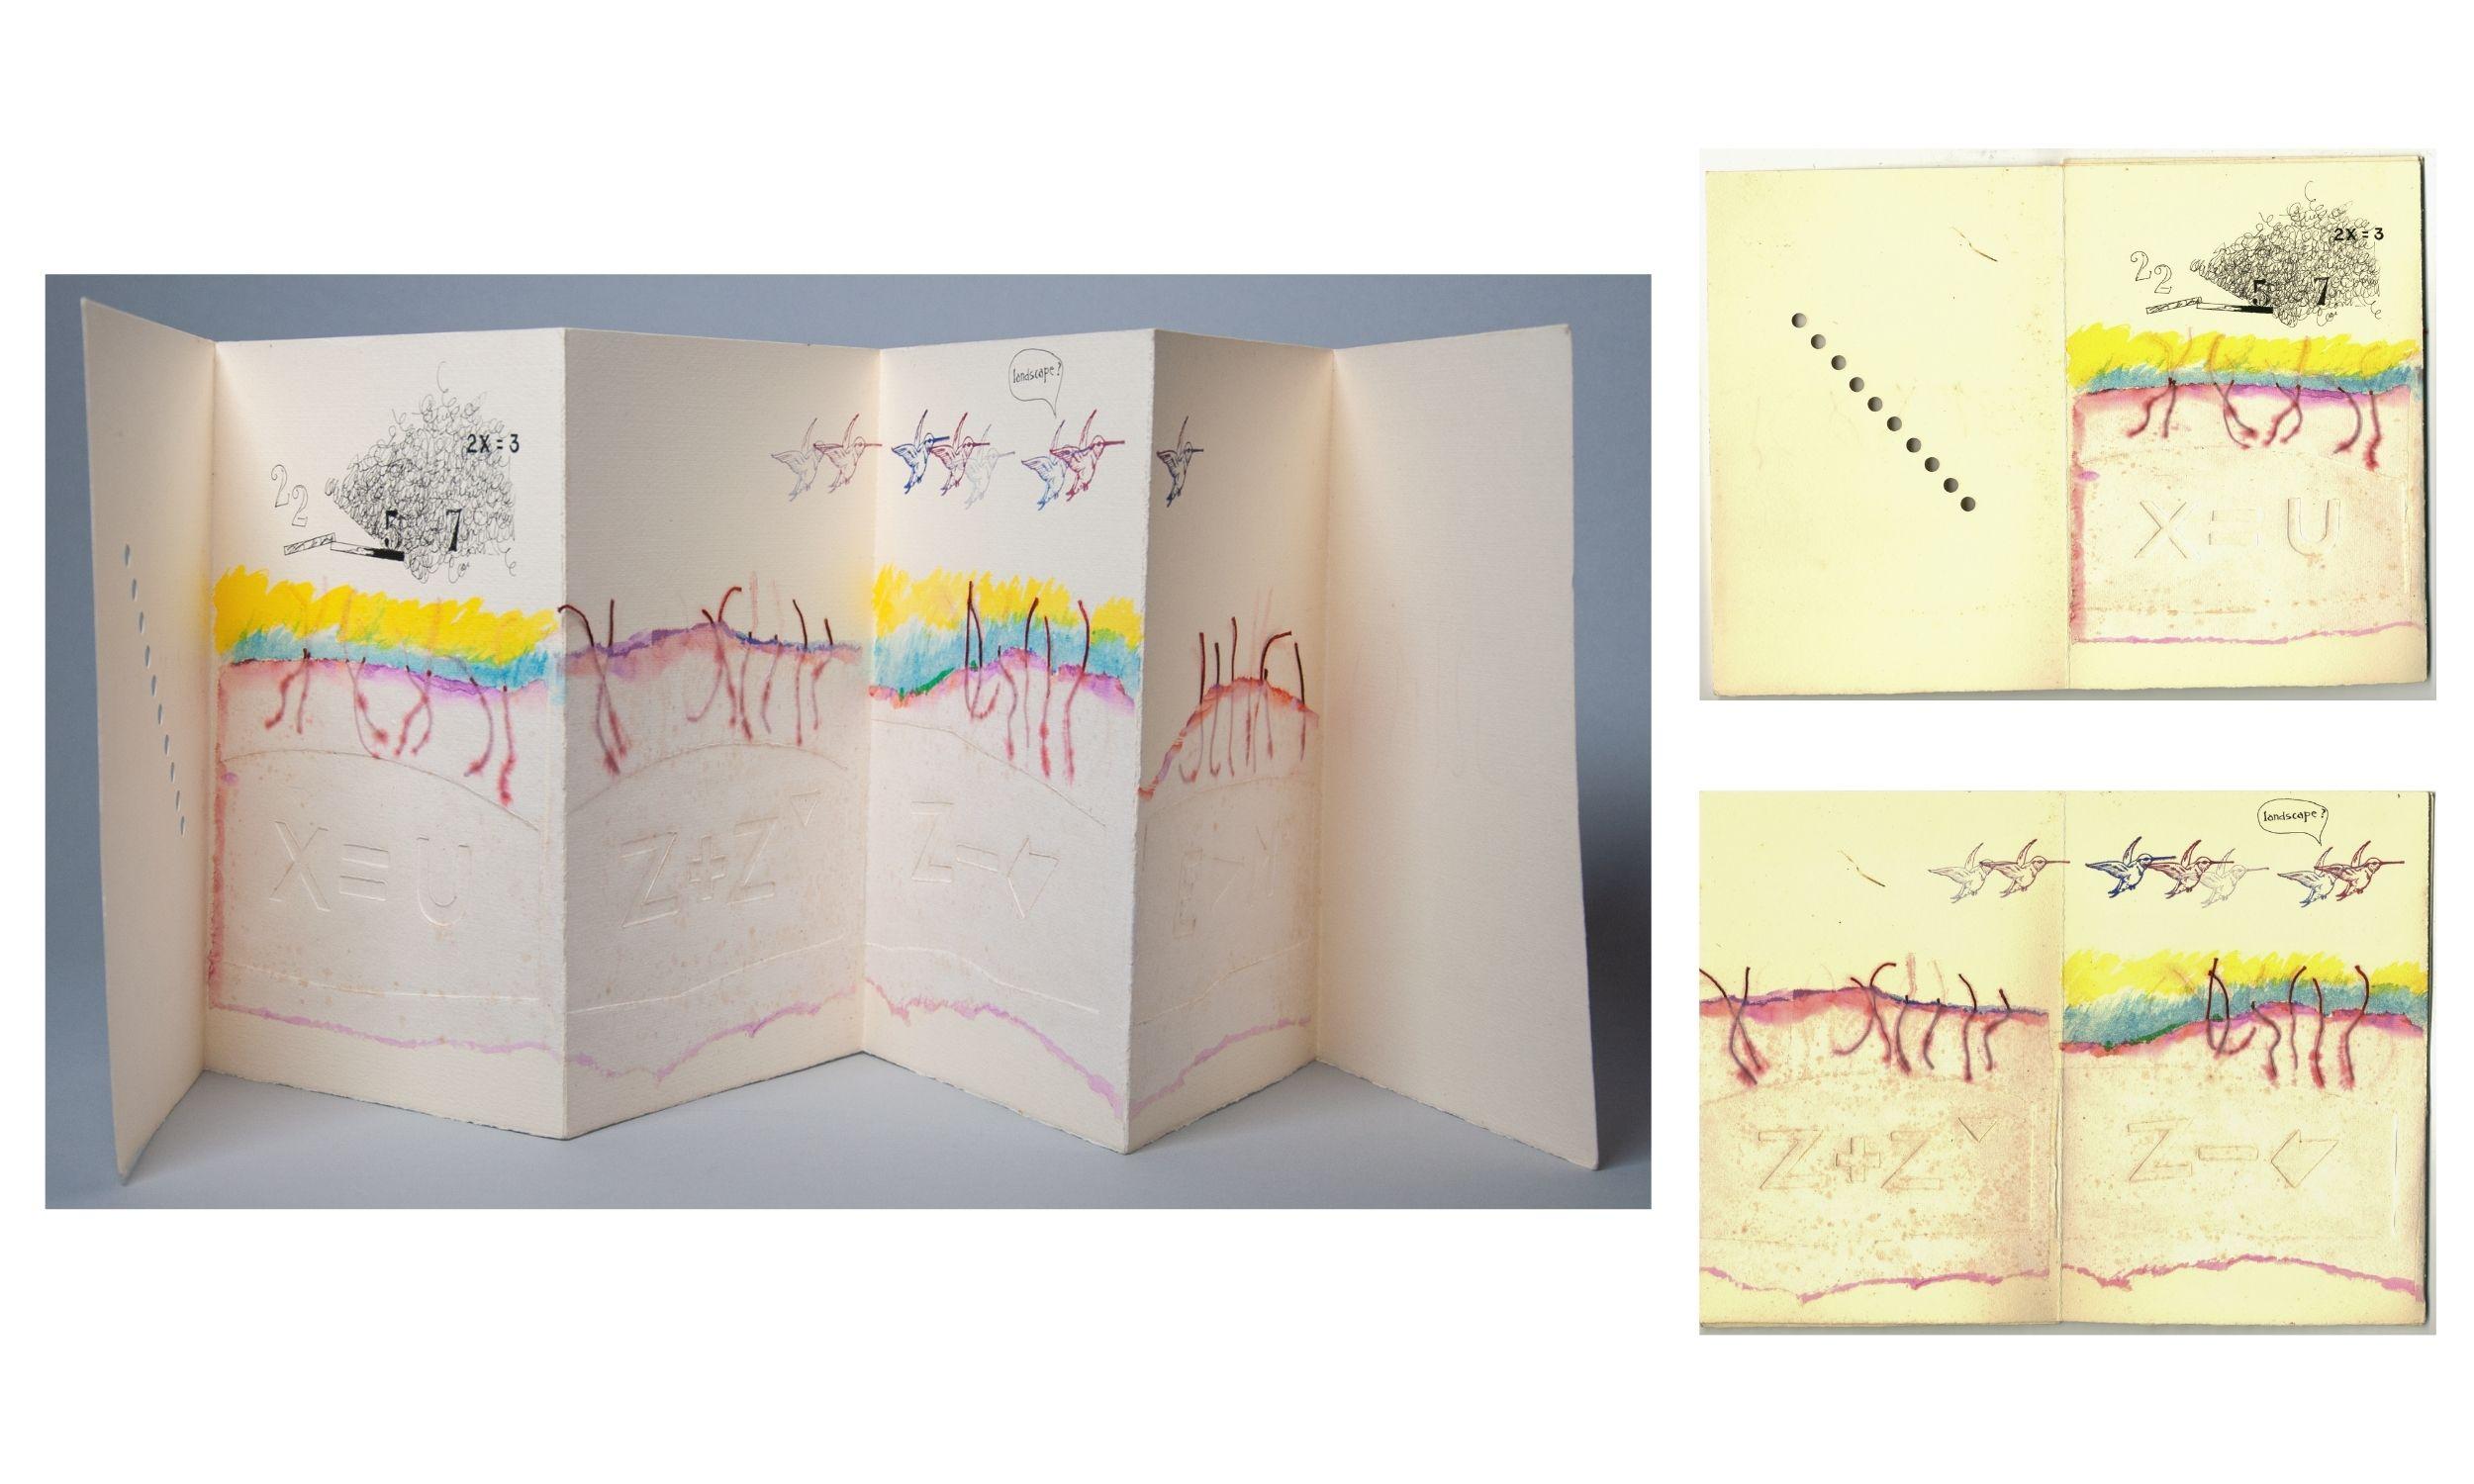 The inside side accordion book is on the left side of the photo and two zoom in pictures of the book’s inner side on the right side of the photo. The inside has a band of yellow, pink, and blue across it with black ink on the left side and birds on the right side.  